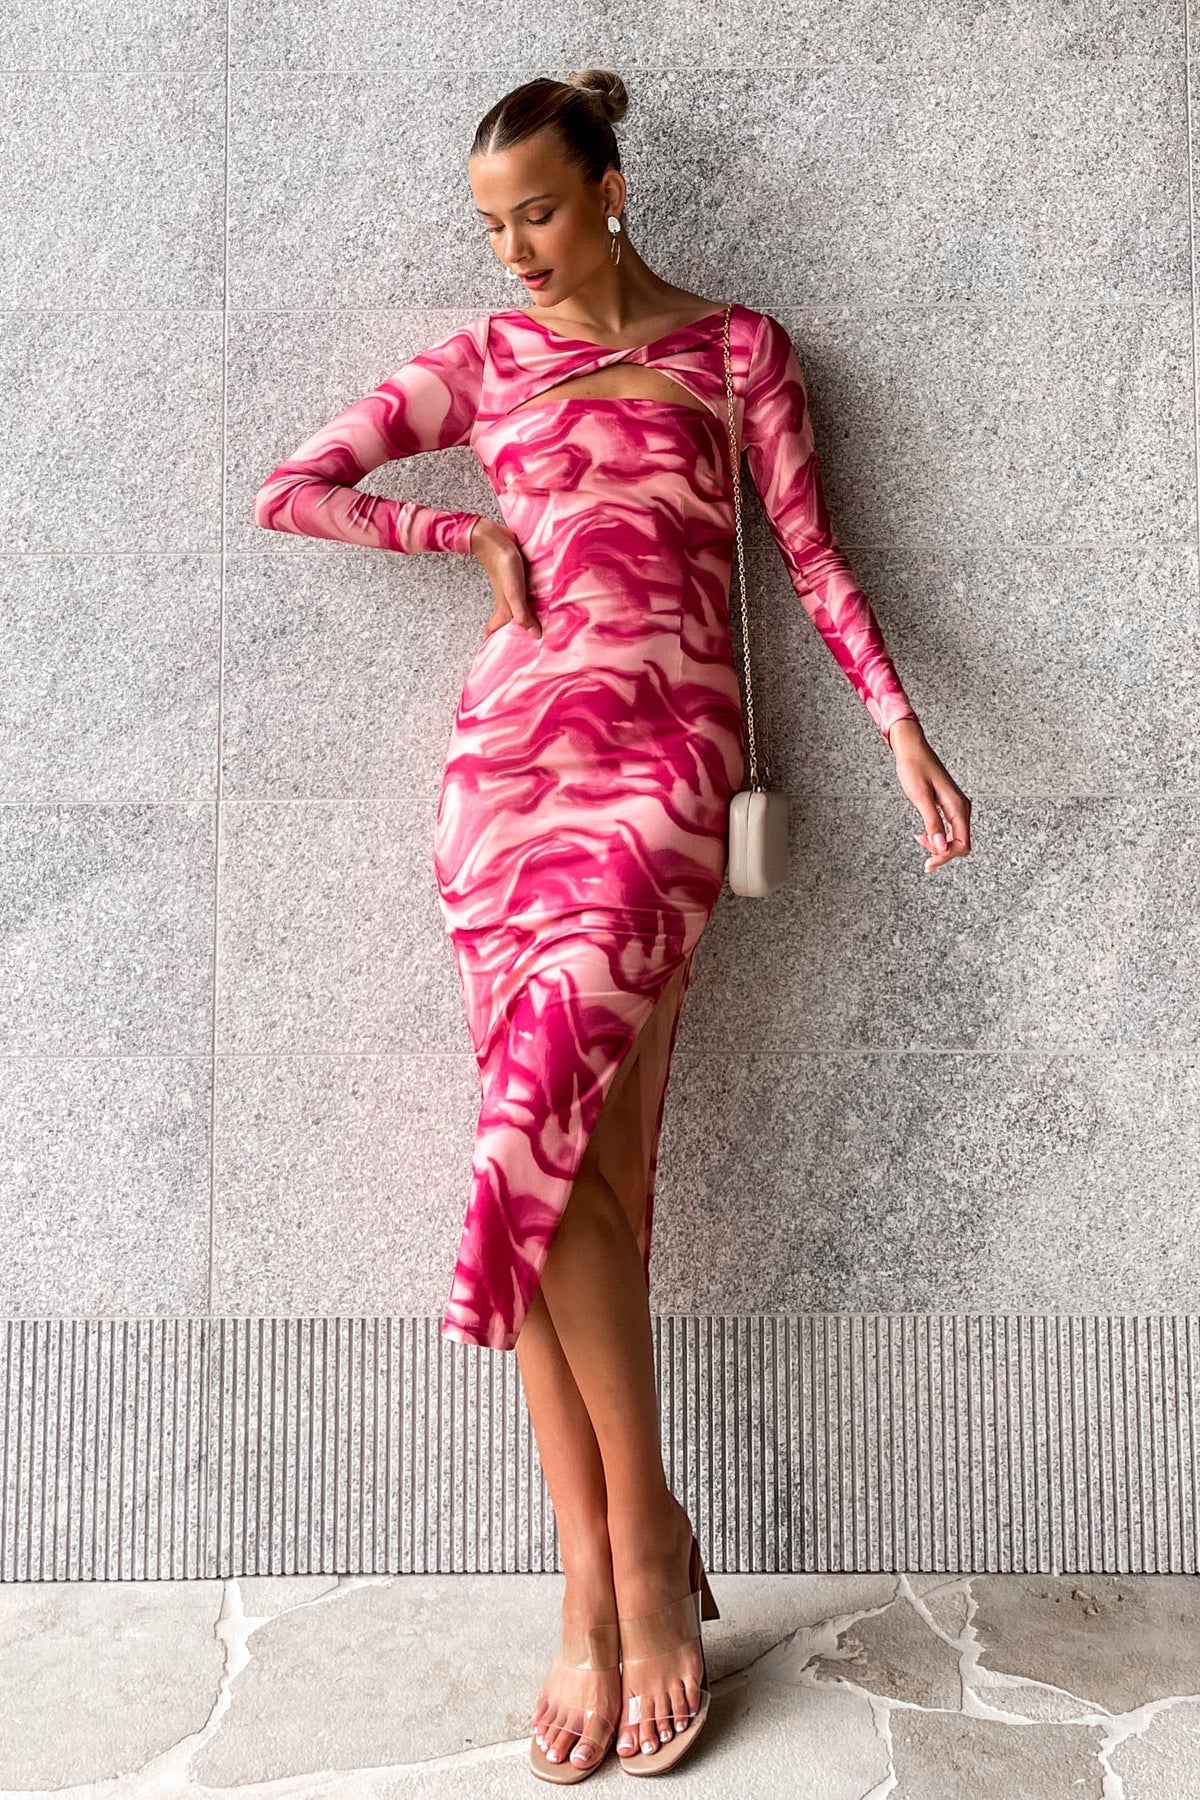 Darby Dress, BODYCON, DRESS, DRESSES, LONG SLEEVE, MIDI DRESS, new arrivals, PINK, POLYESTER AND SPANDEX, , -MISHKAH